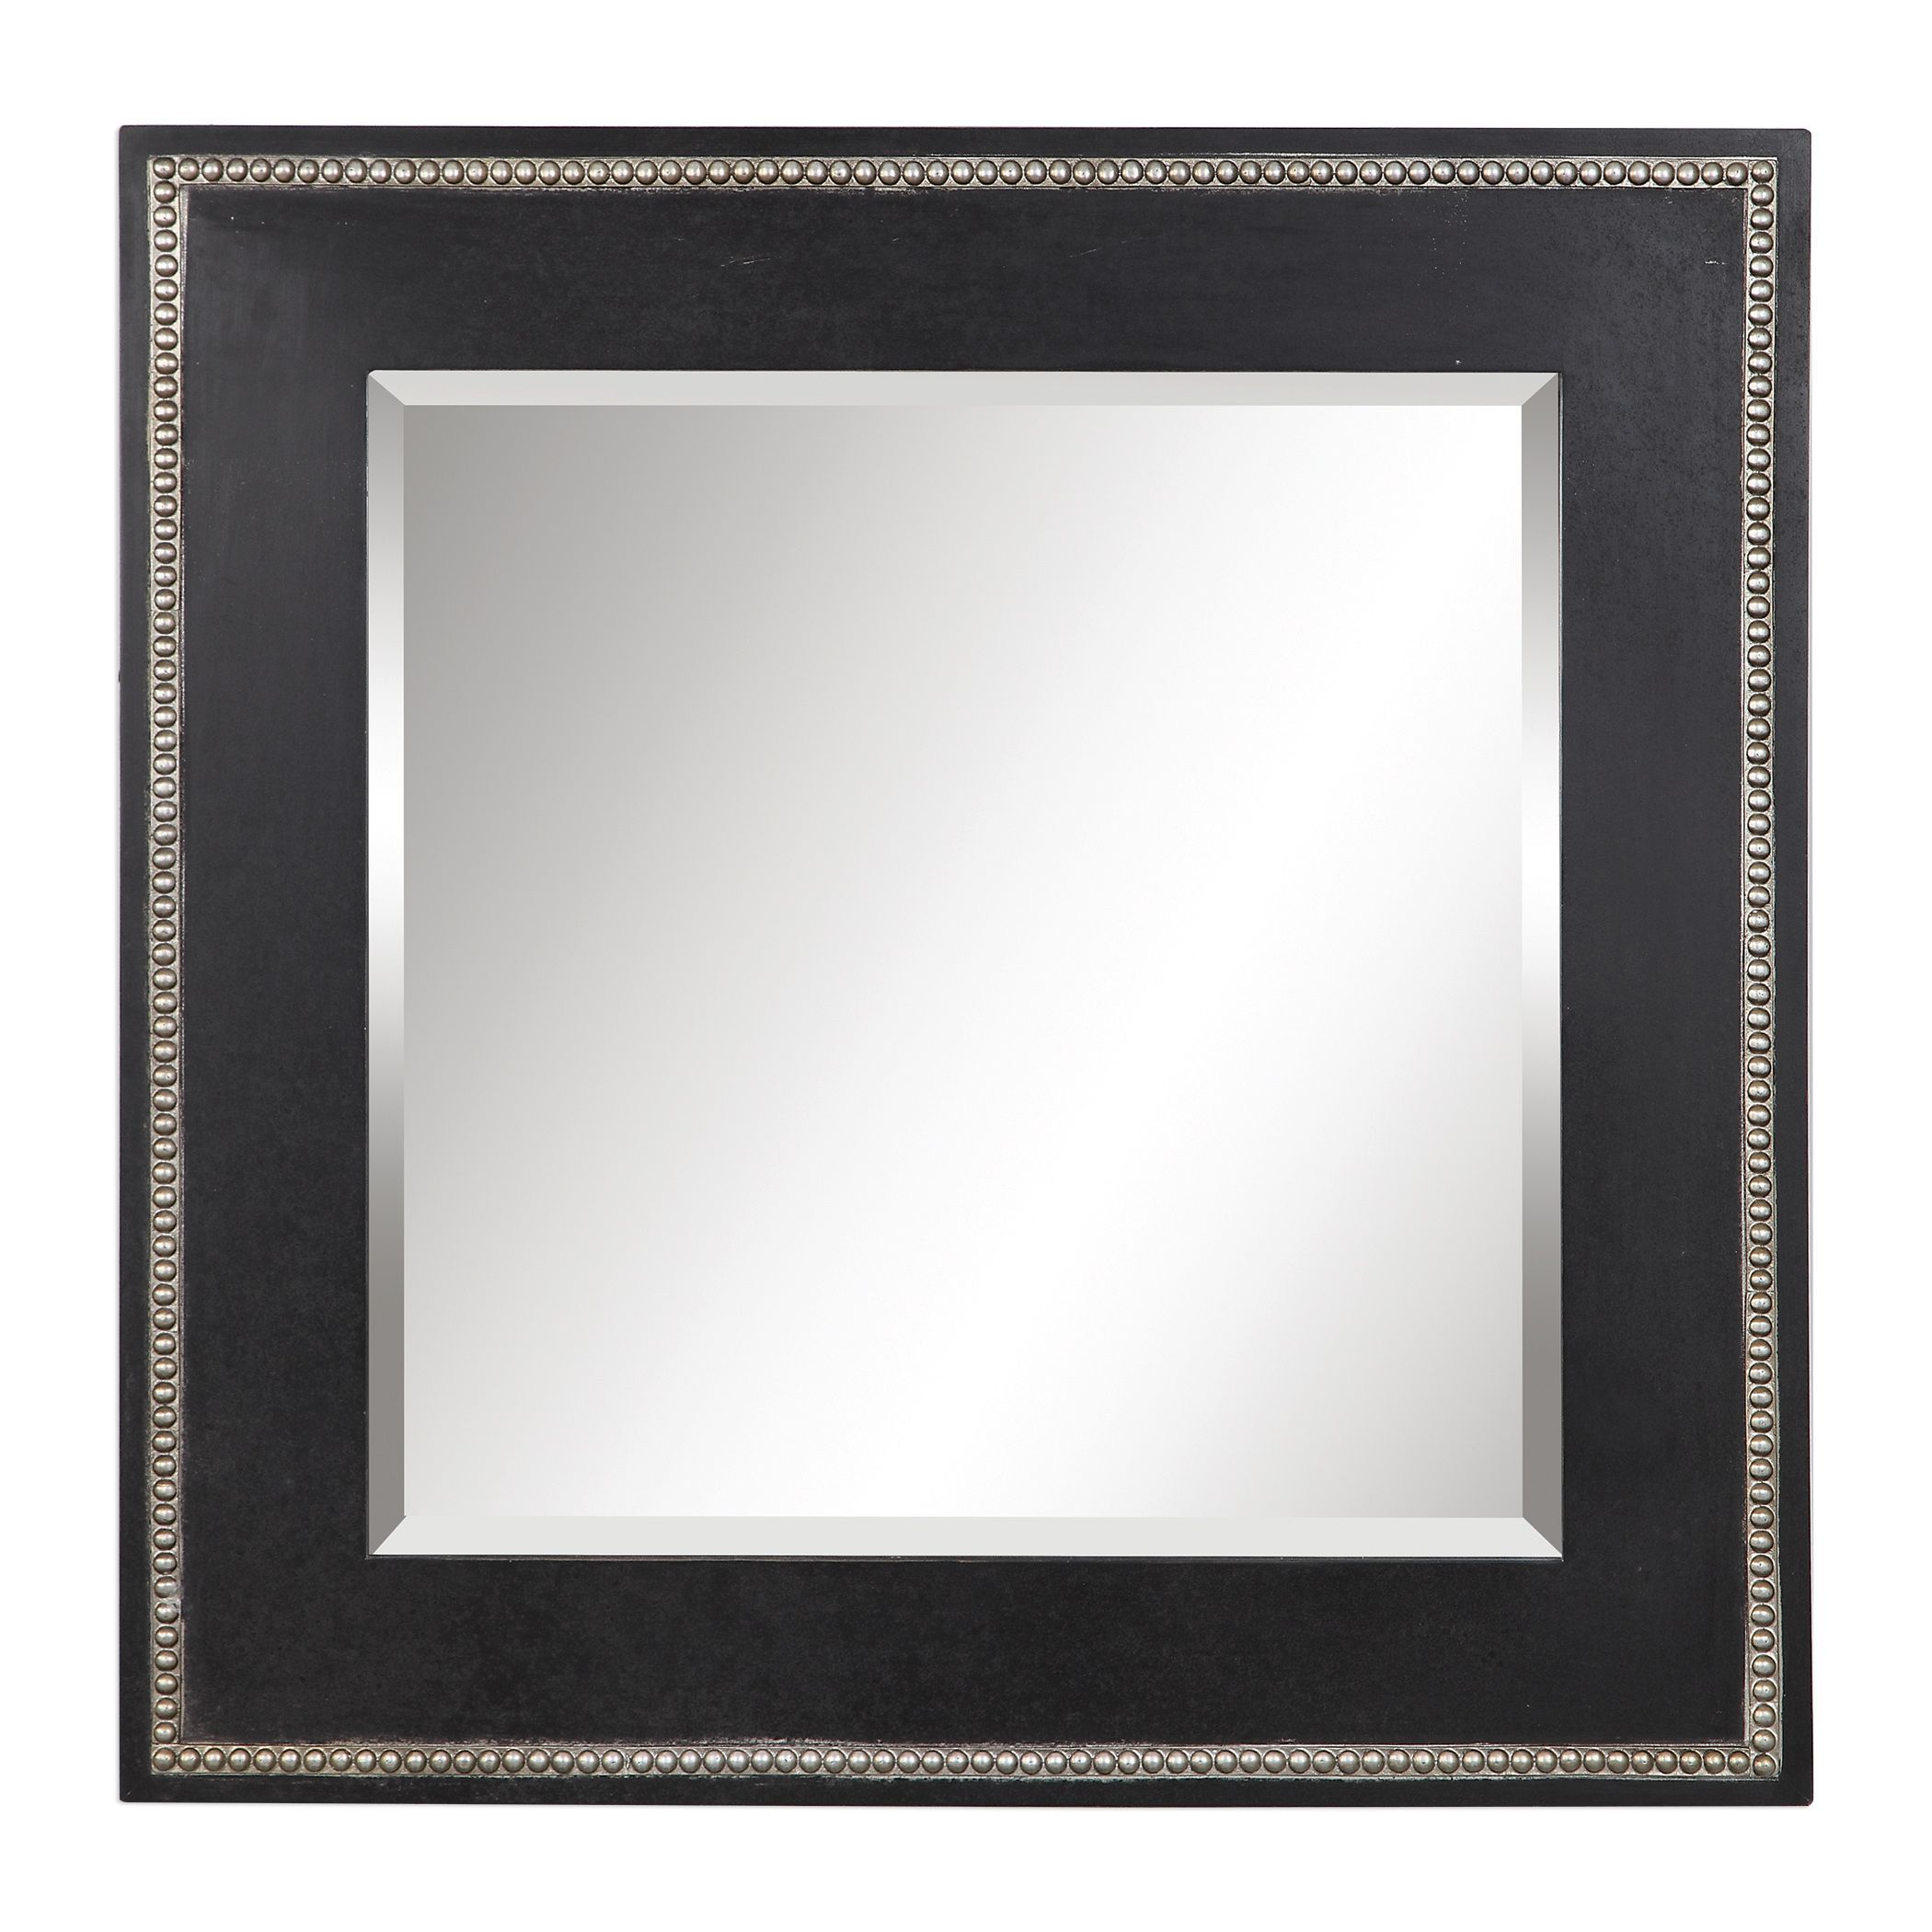 Large Black Square Beveled Wall Mirror Contemporary Style Traditional For Gingerich Resin Modern & Contemporary Accent Mirrors (View 7 of 15)